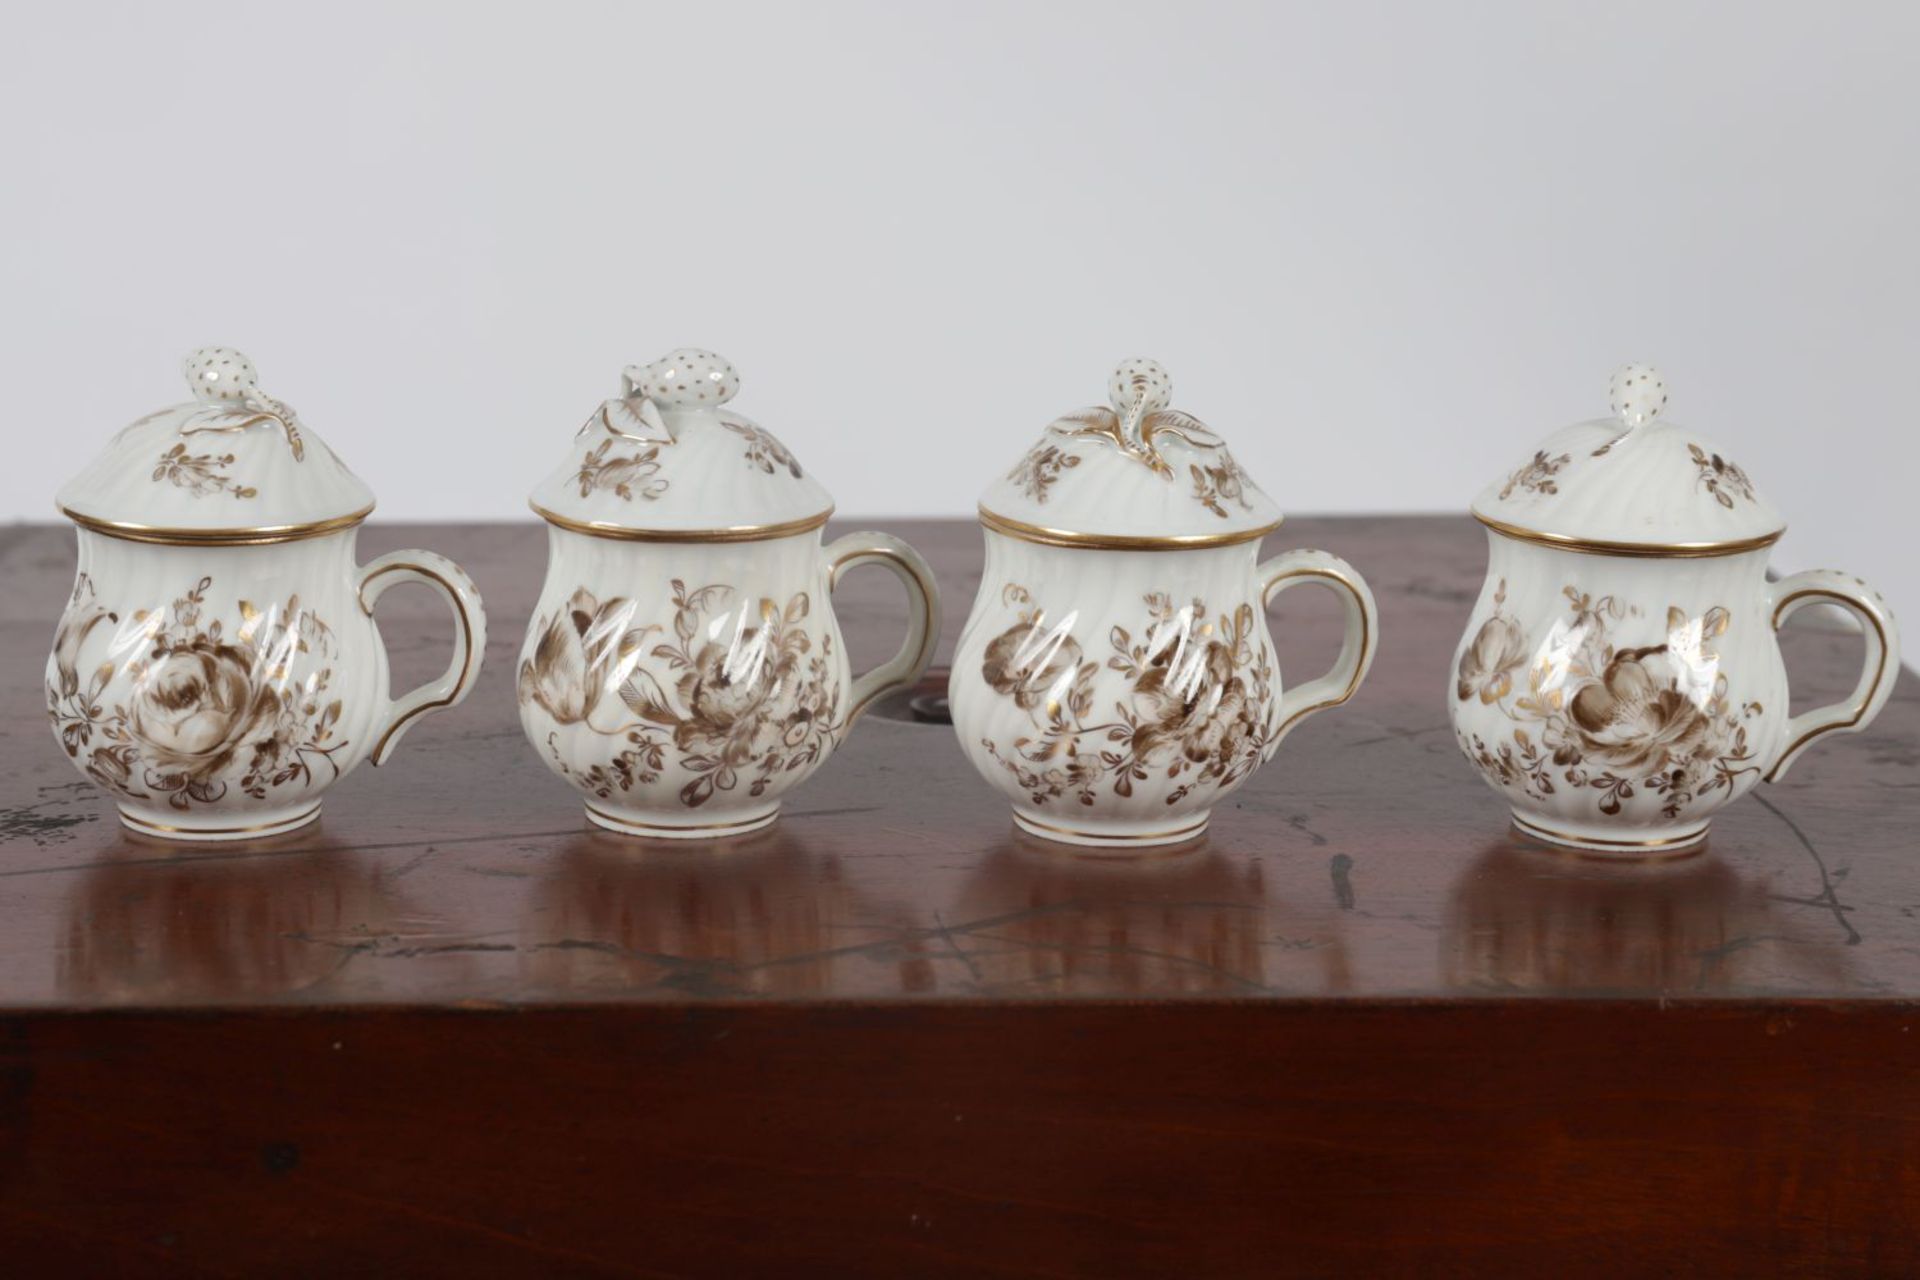 SET OF 4 VIENNA PORCELAIN CHOCOLATE CUPS